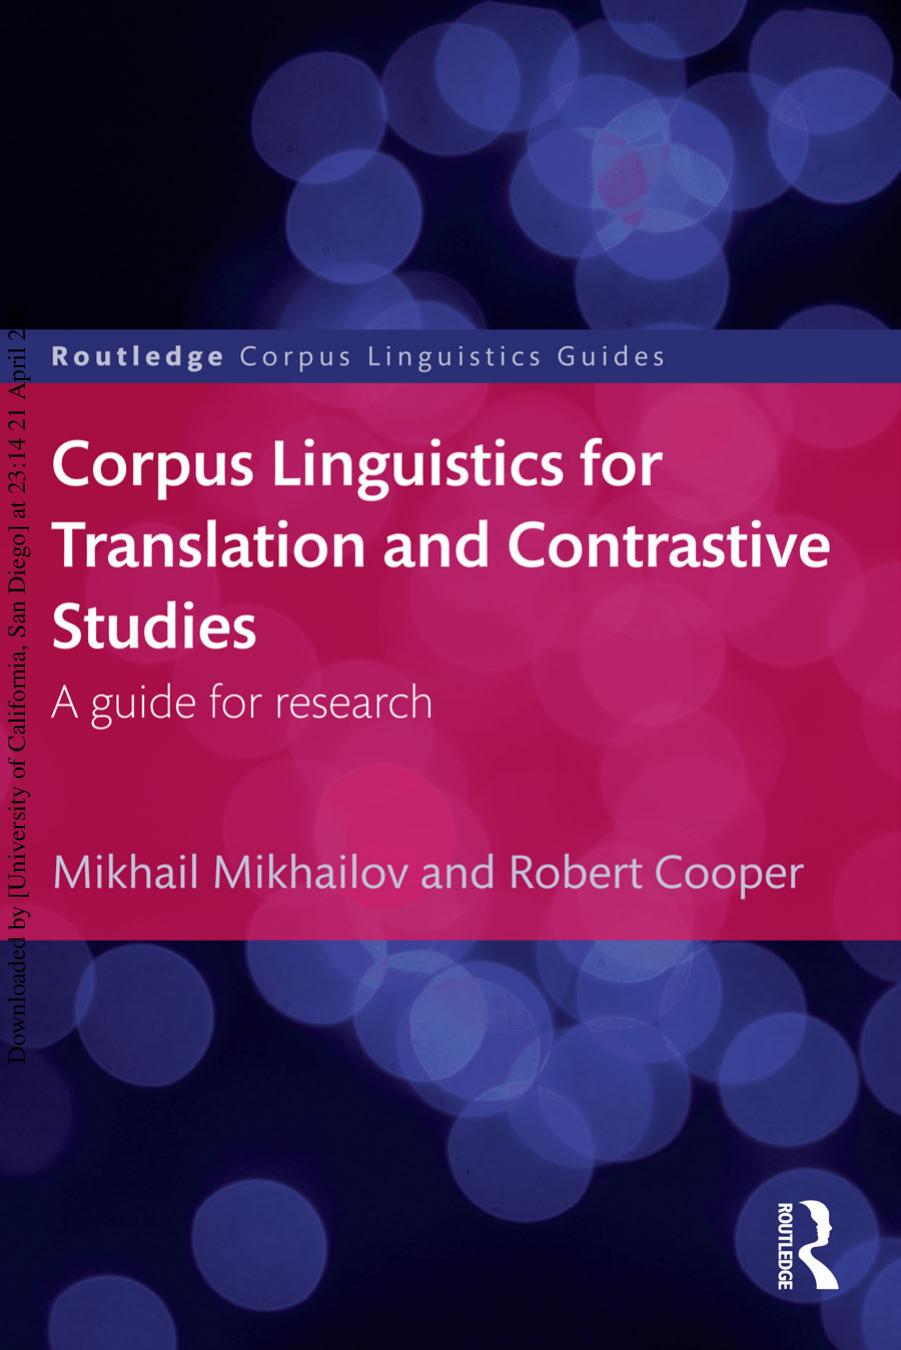 Corpus Linguistics for Translation and Contrastive Studies: A Guide for Research